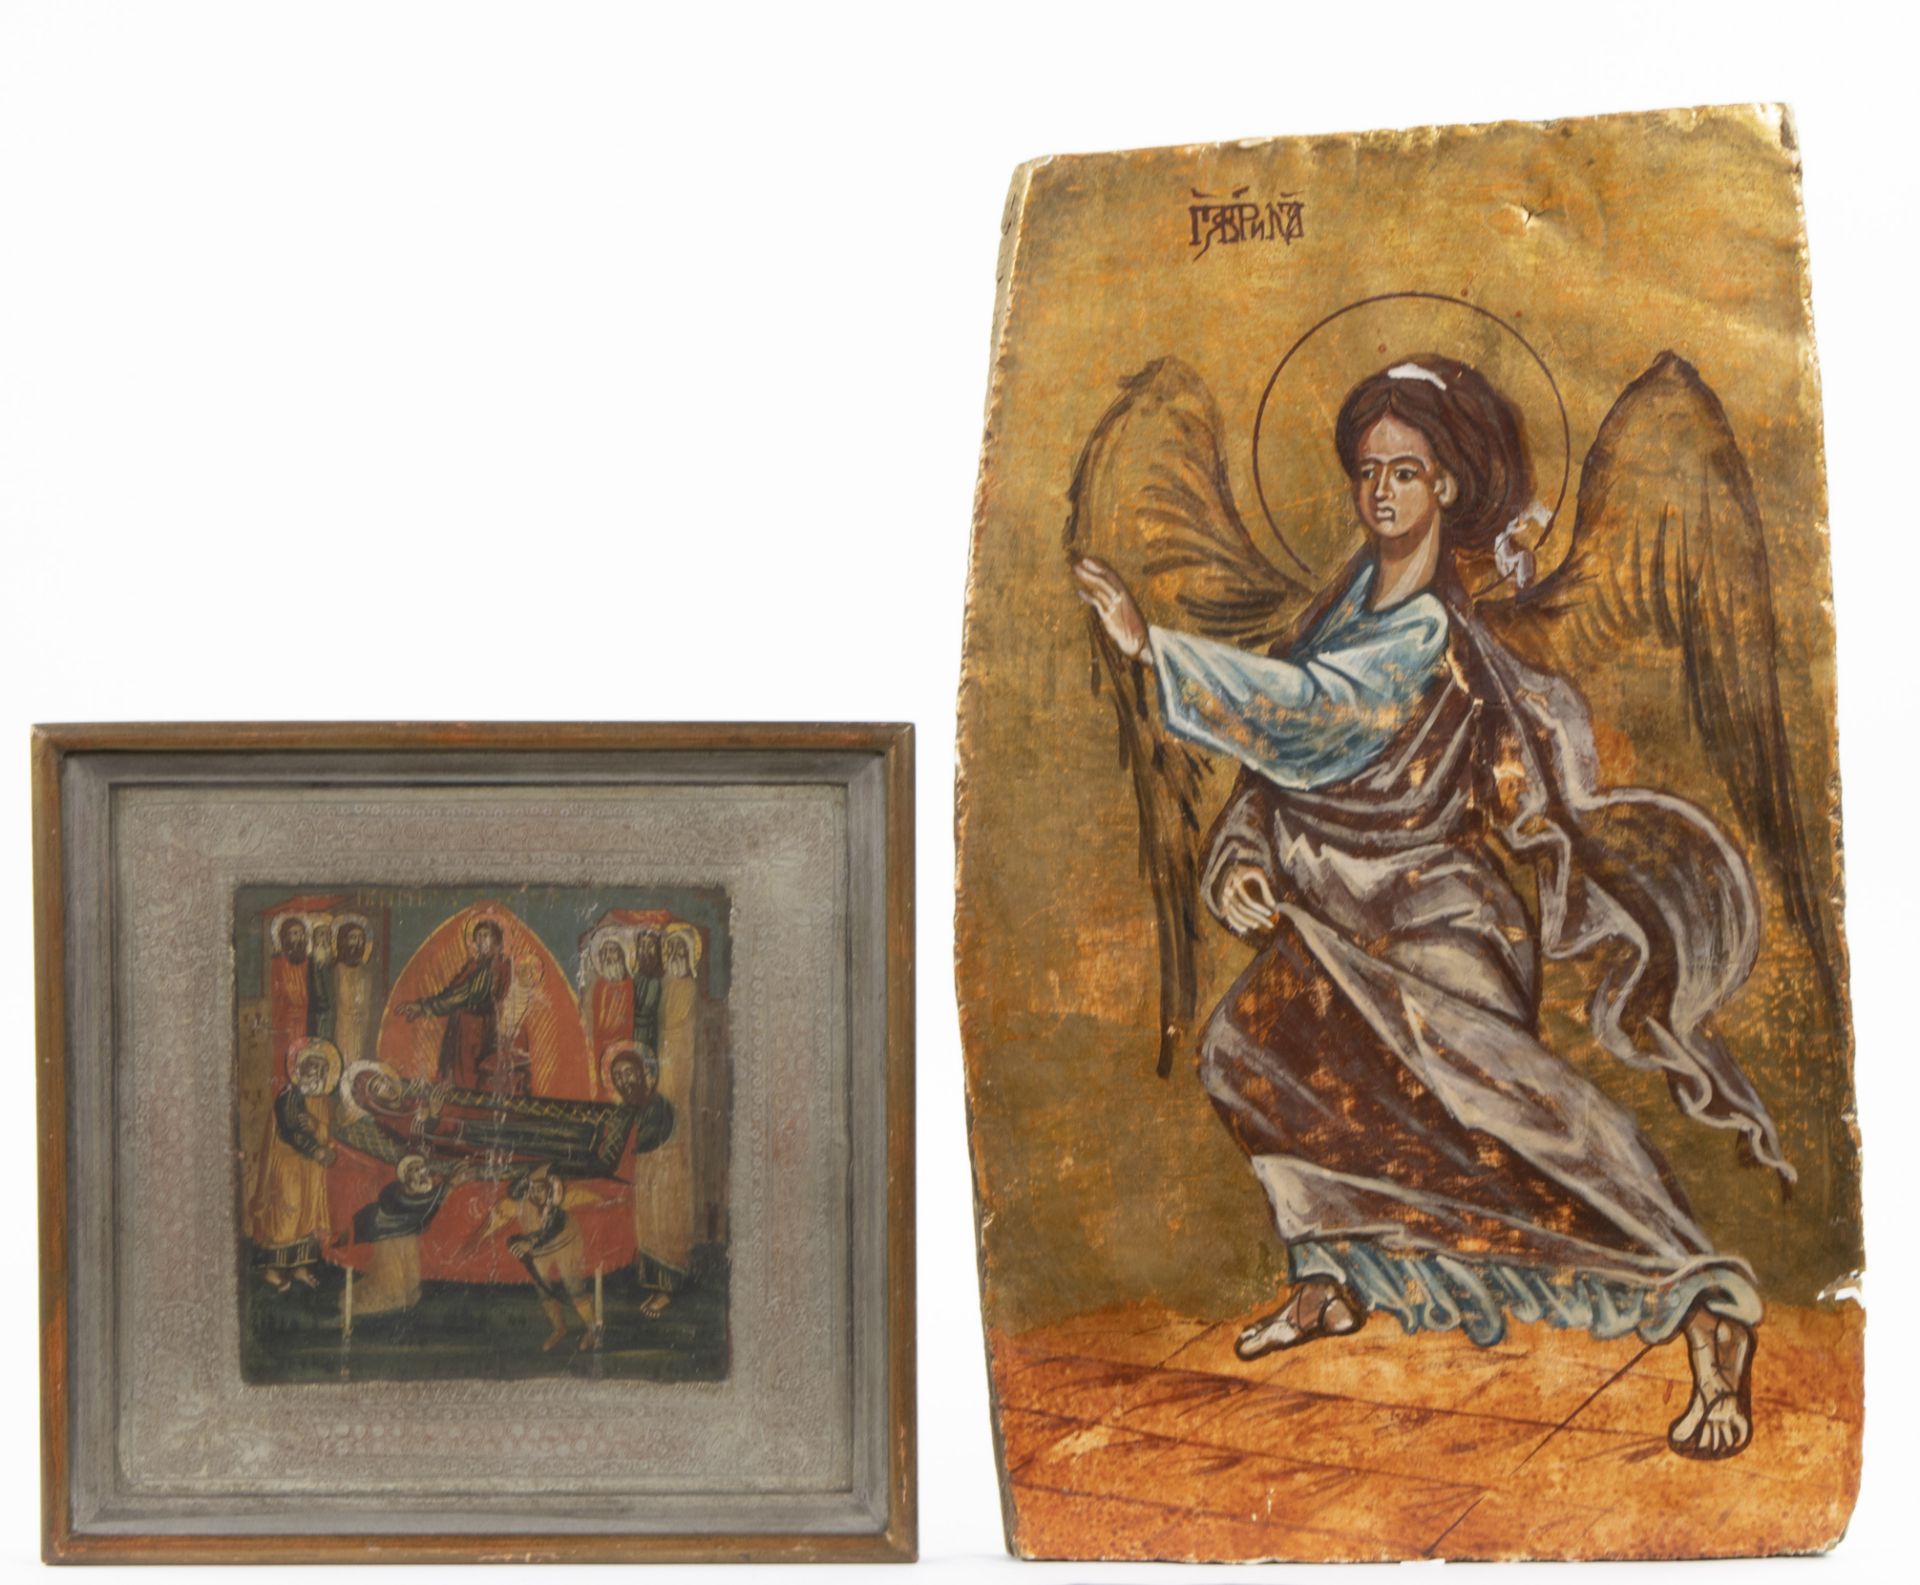 Russian/Bulgarian folkloric icon and Greek/Russian icon 19th century